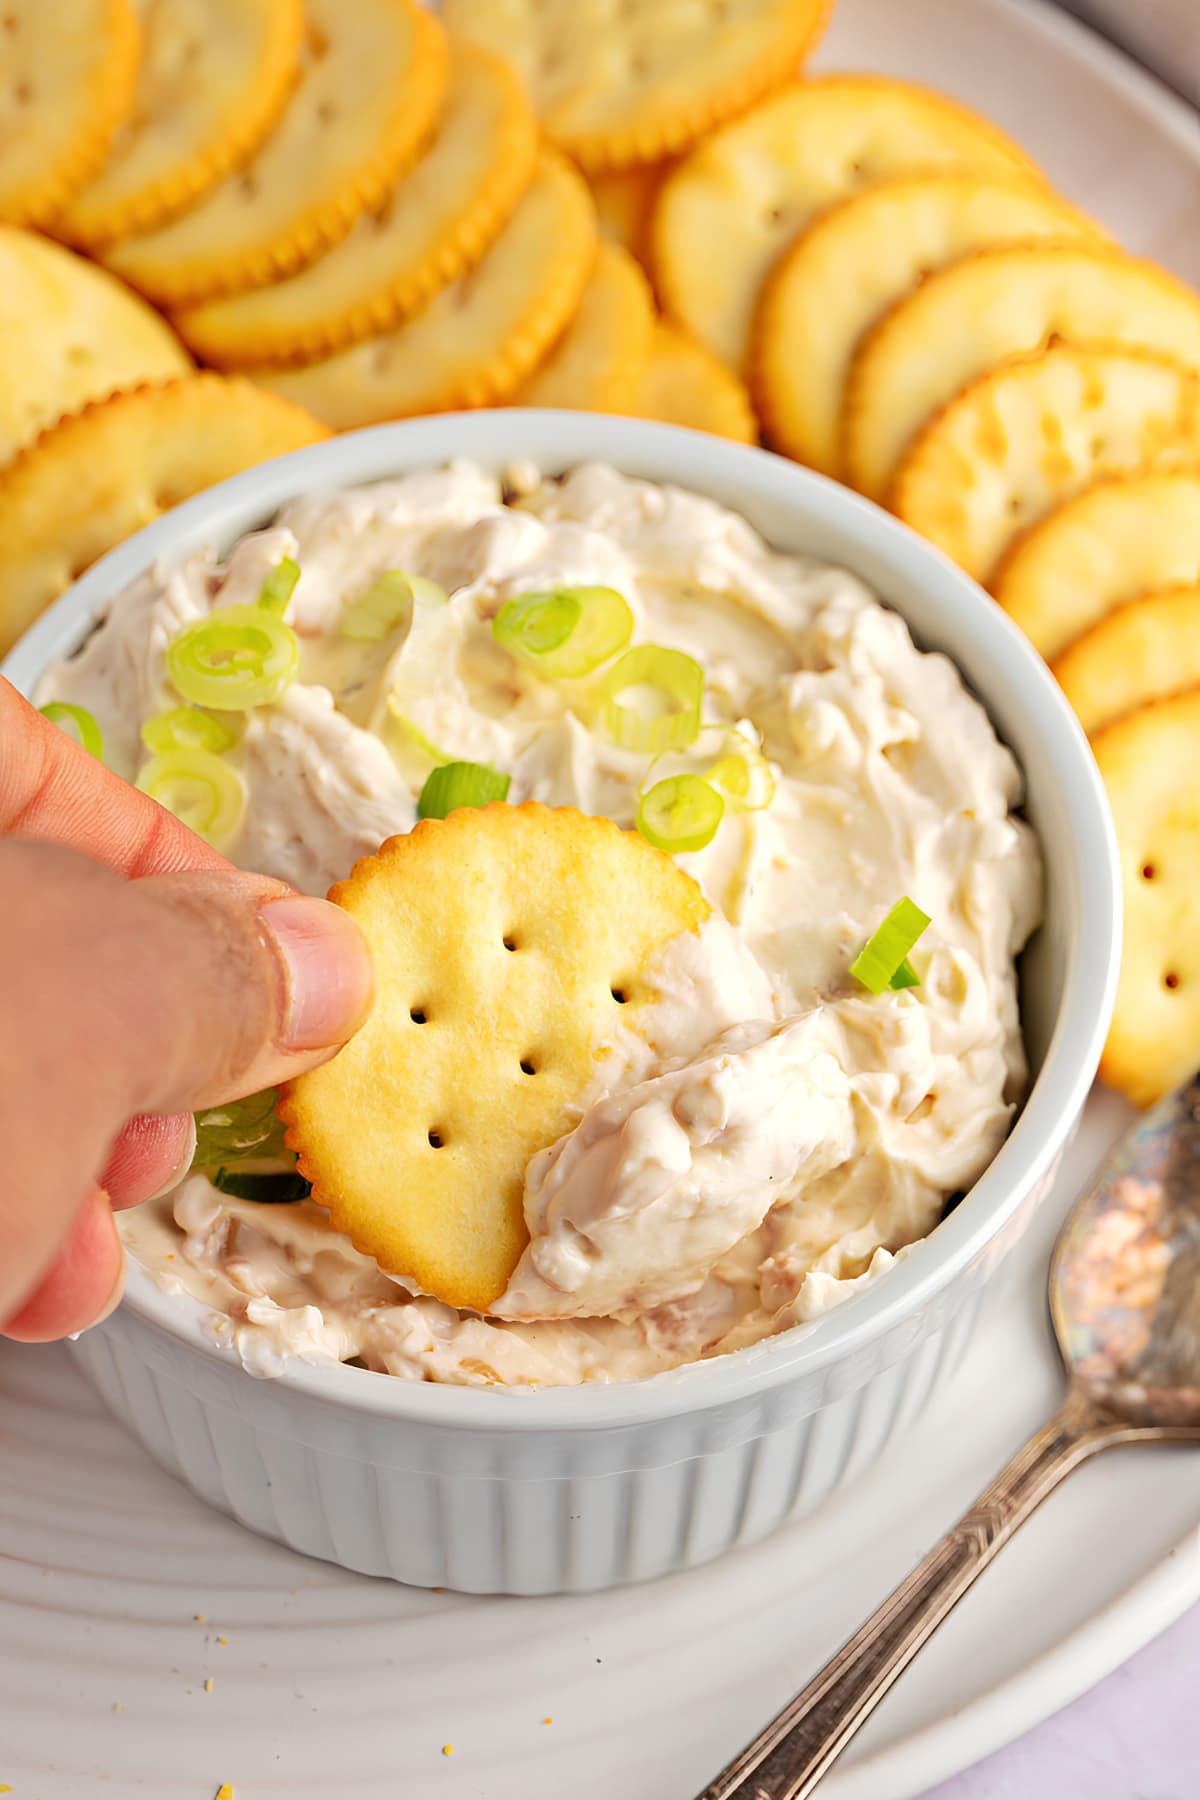 Dipping Biscuit into a Bowl of Clam Dip